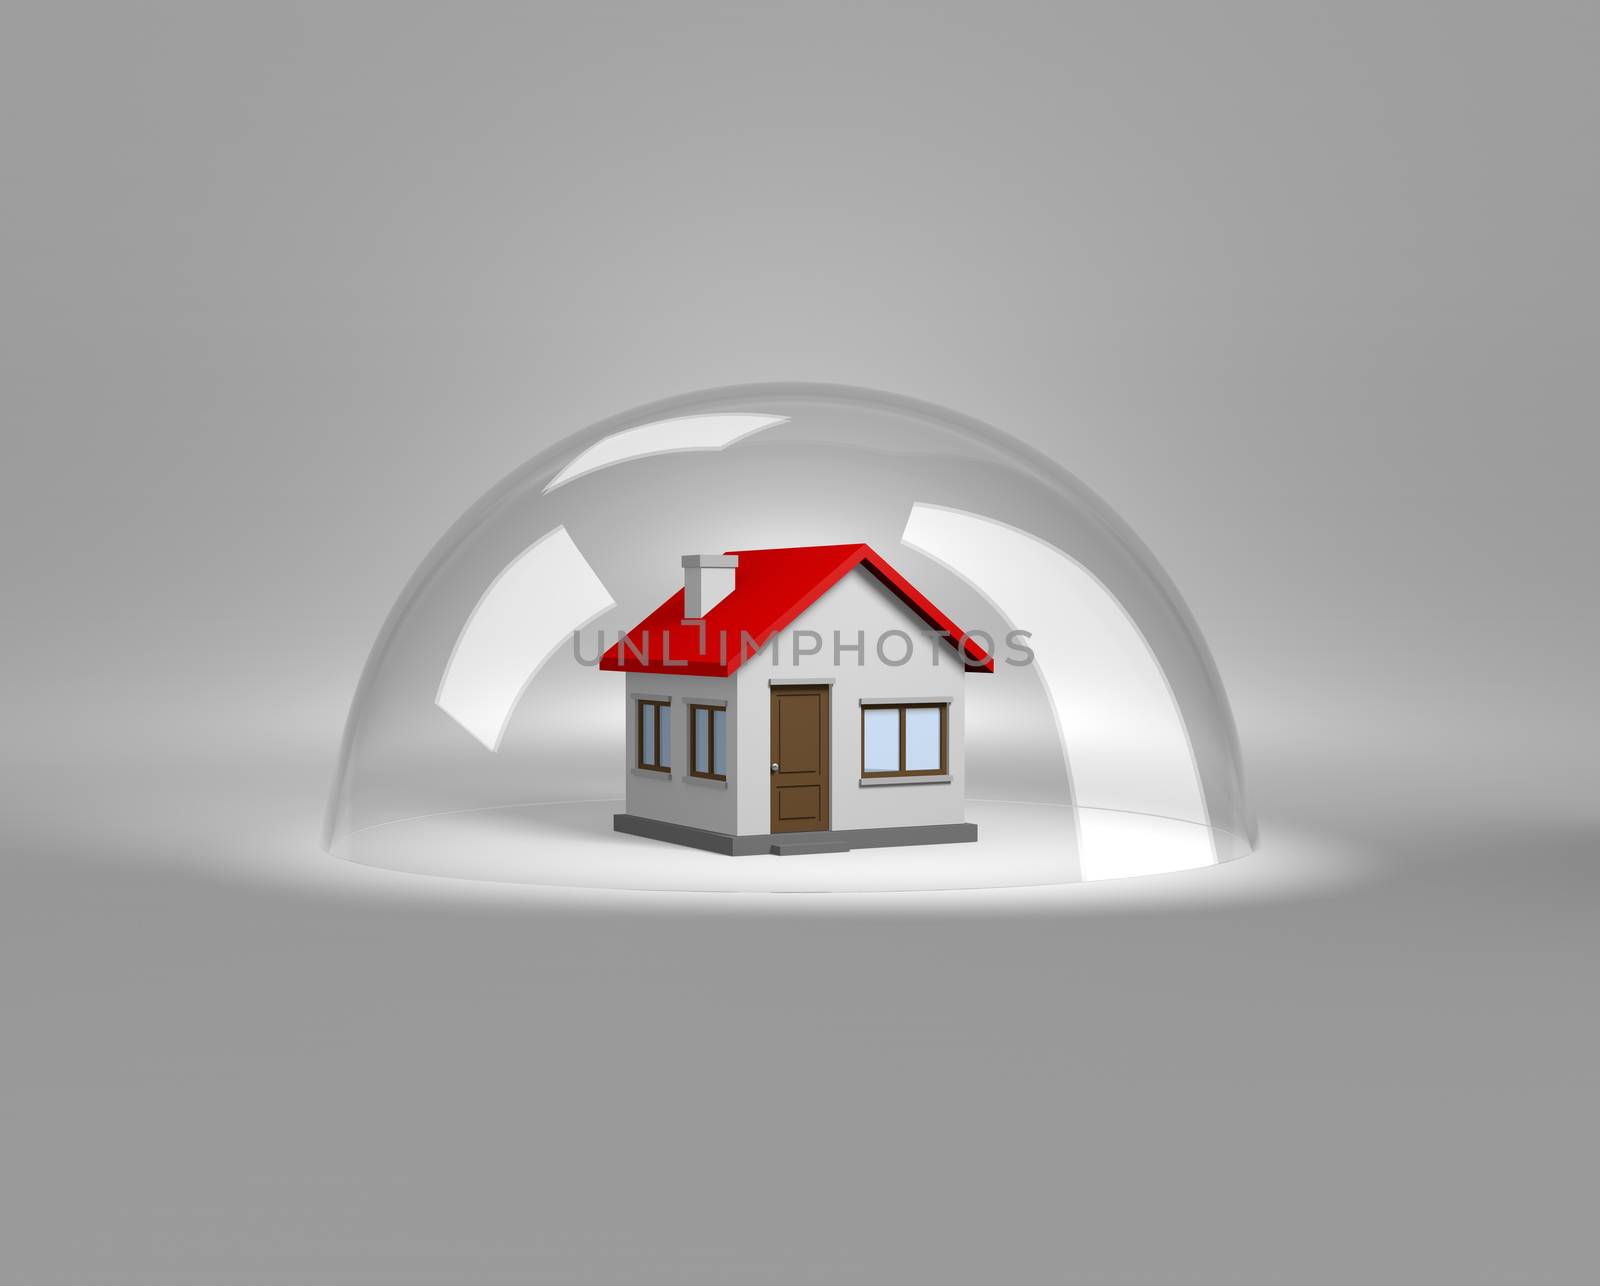 House under a Glass Shield 3D Illustration, Protection Concept